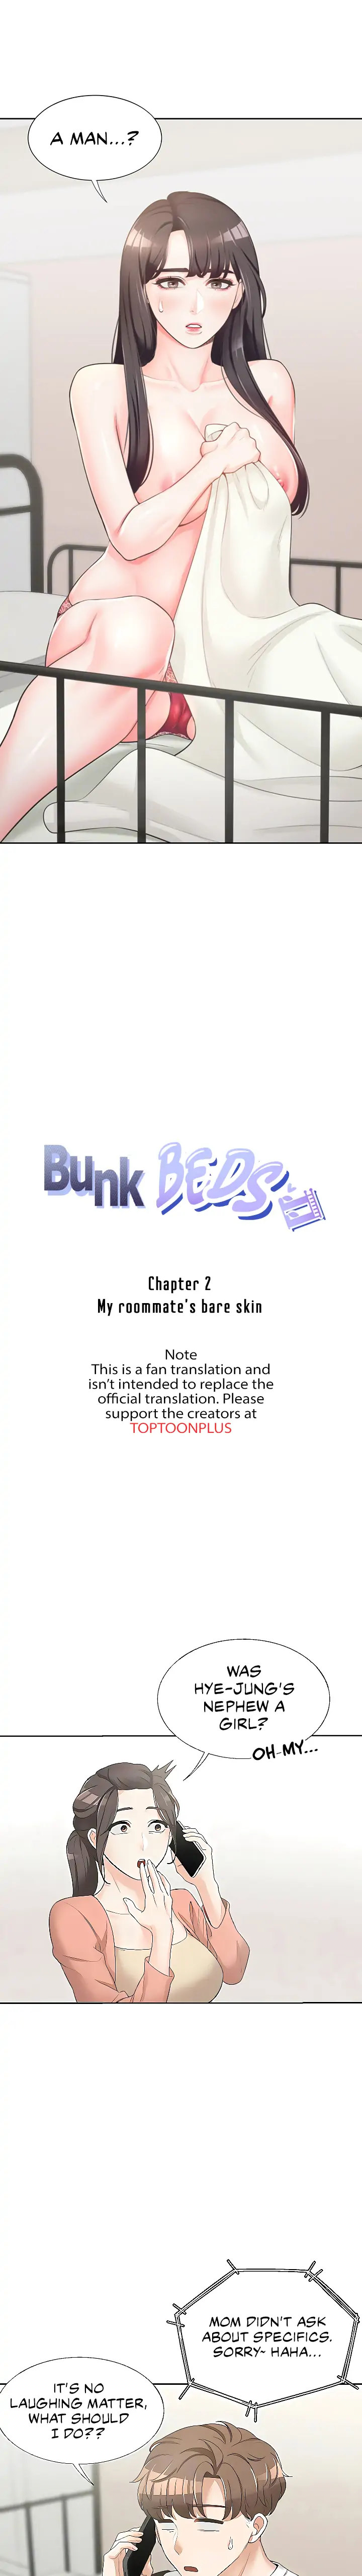 Bunking Bed - Chapter 2 Page 4